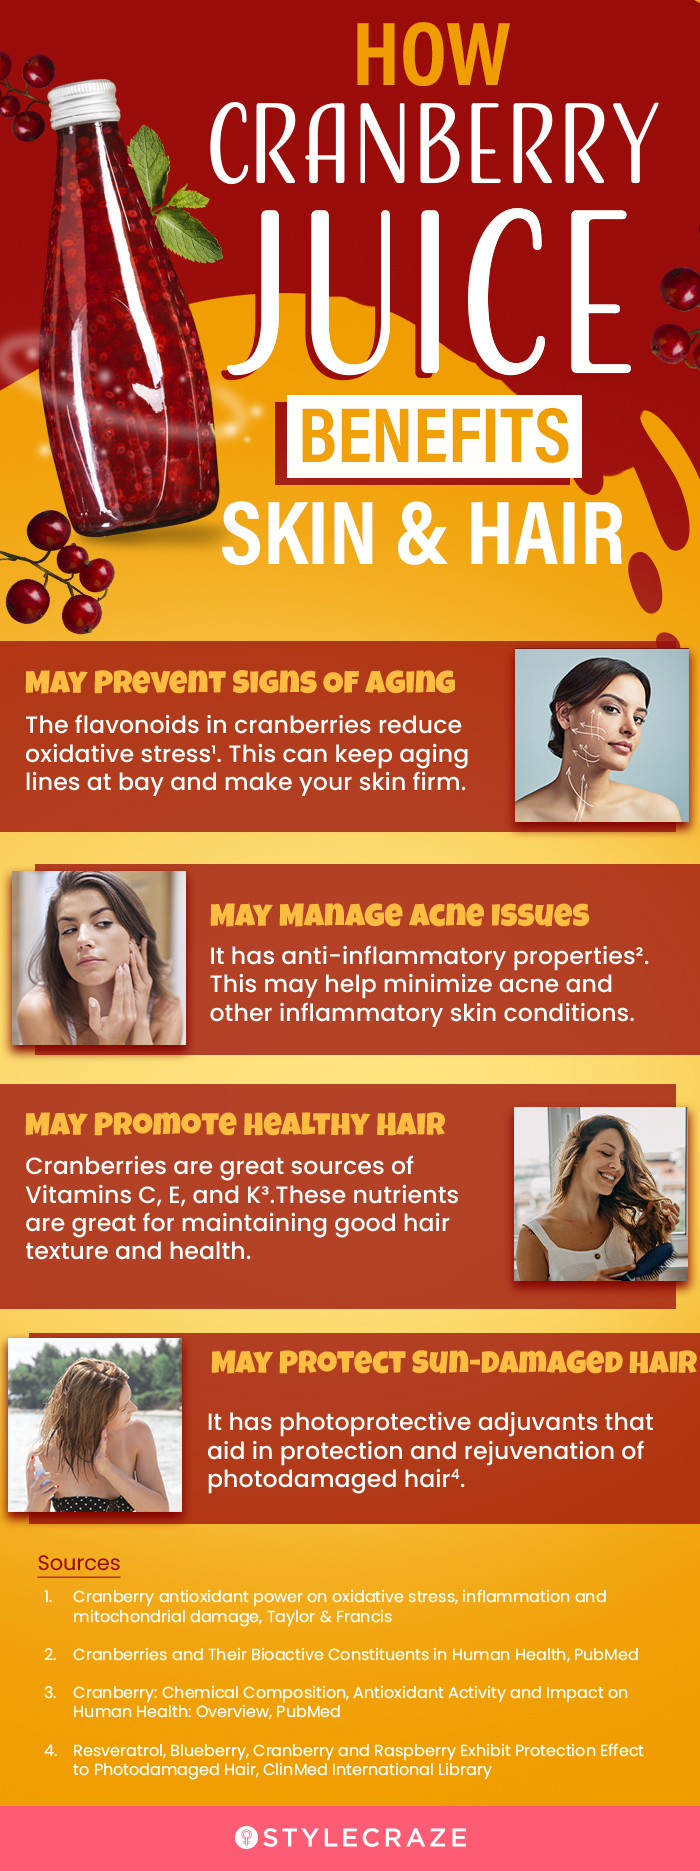 how cranberry juice benefits skin and hair [infographic]